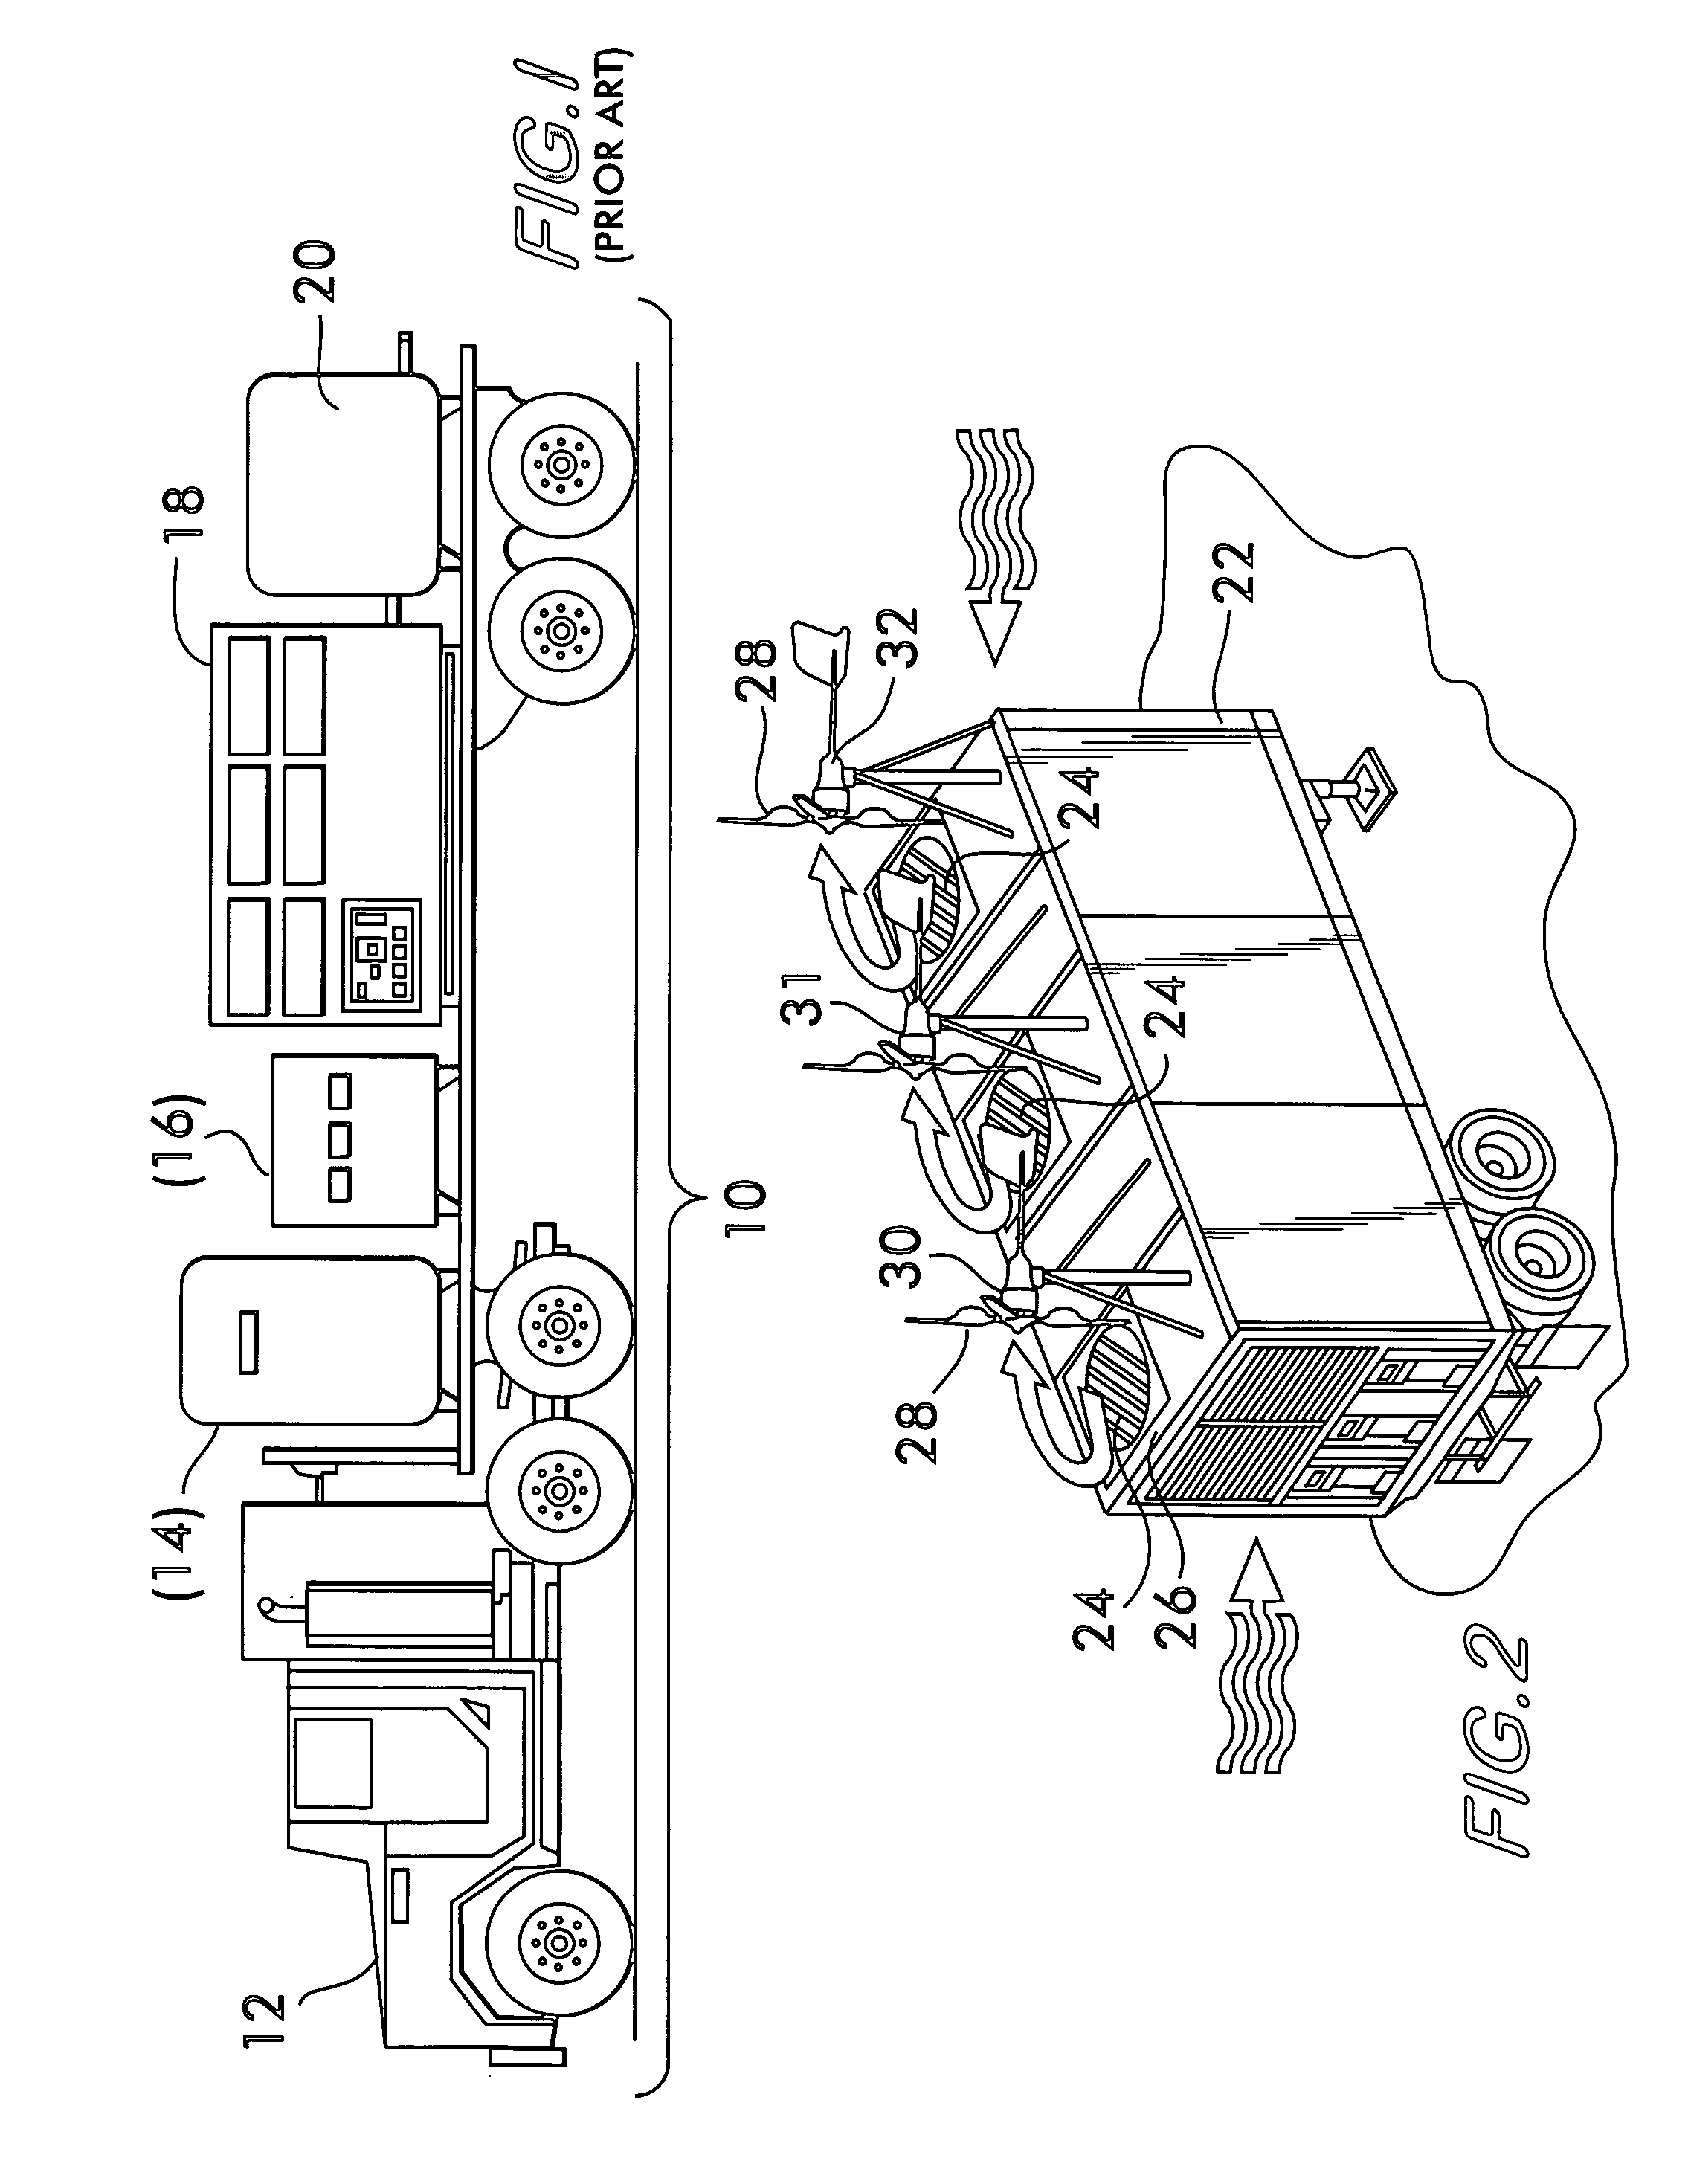 Co-generation power system for supplying electricity to an air-water recovery system